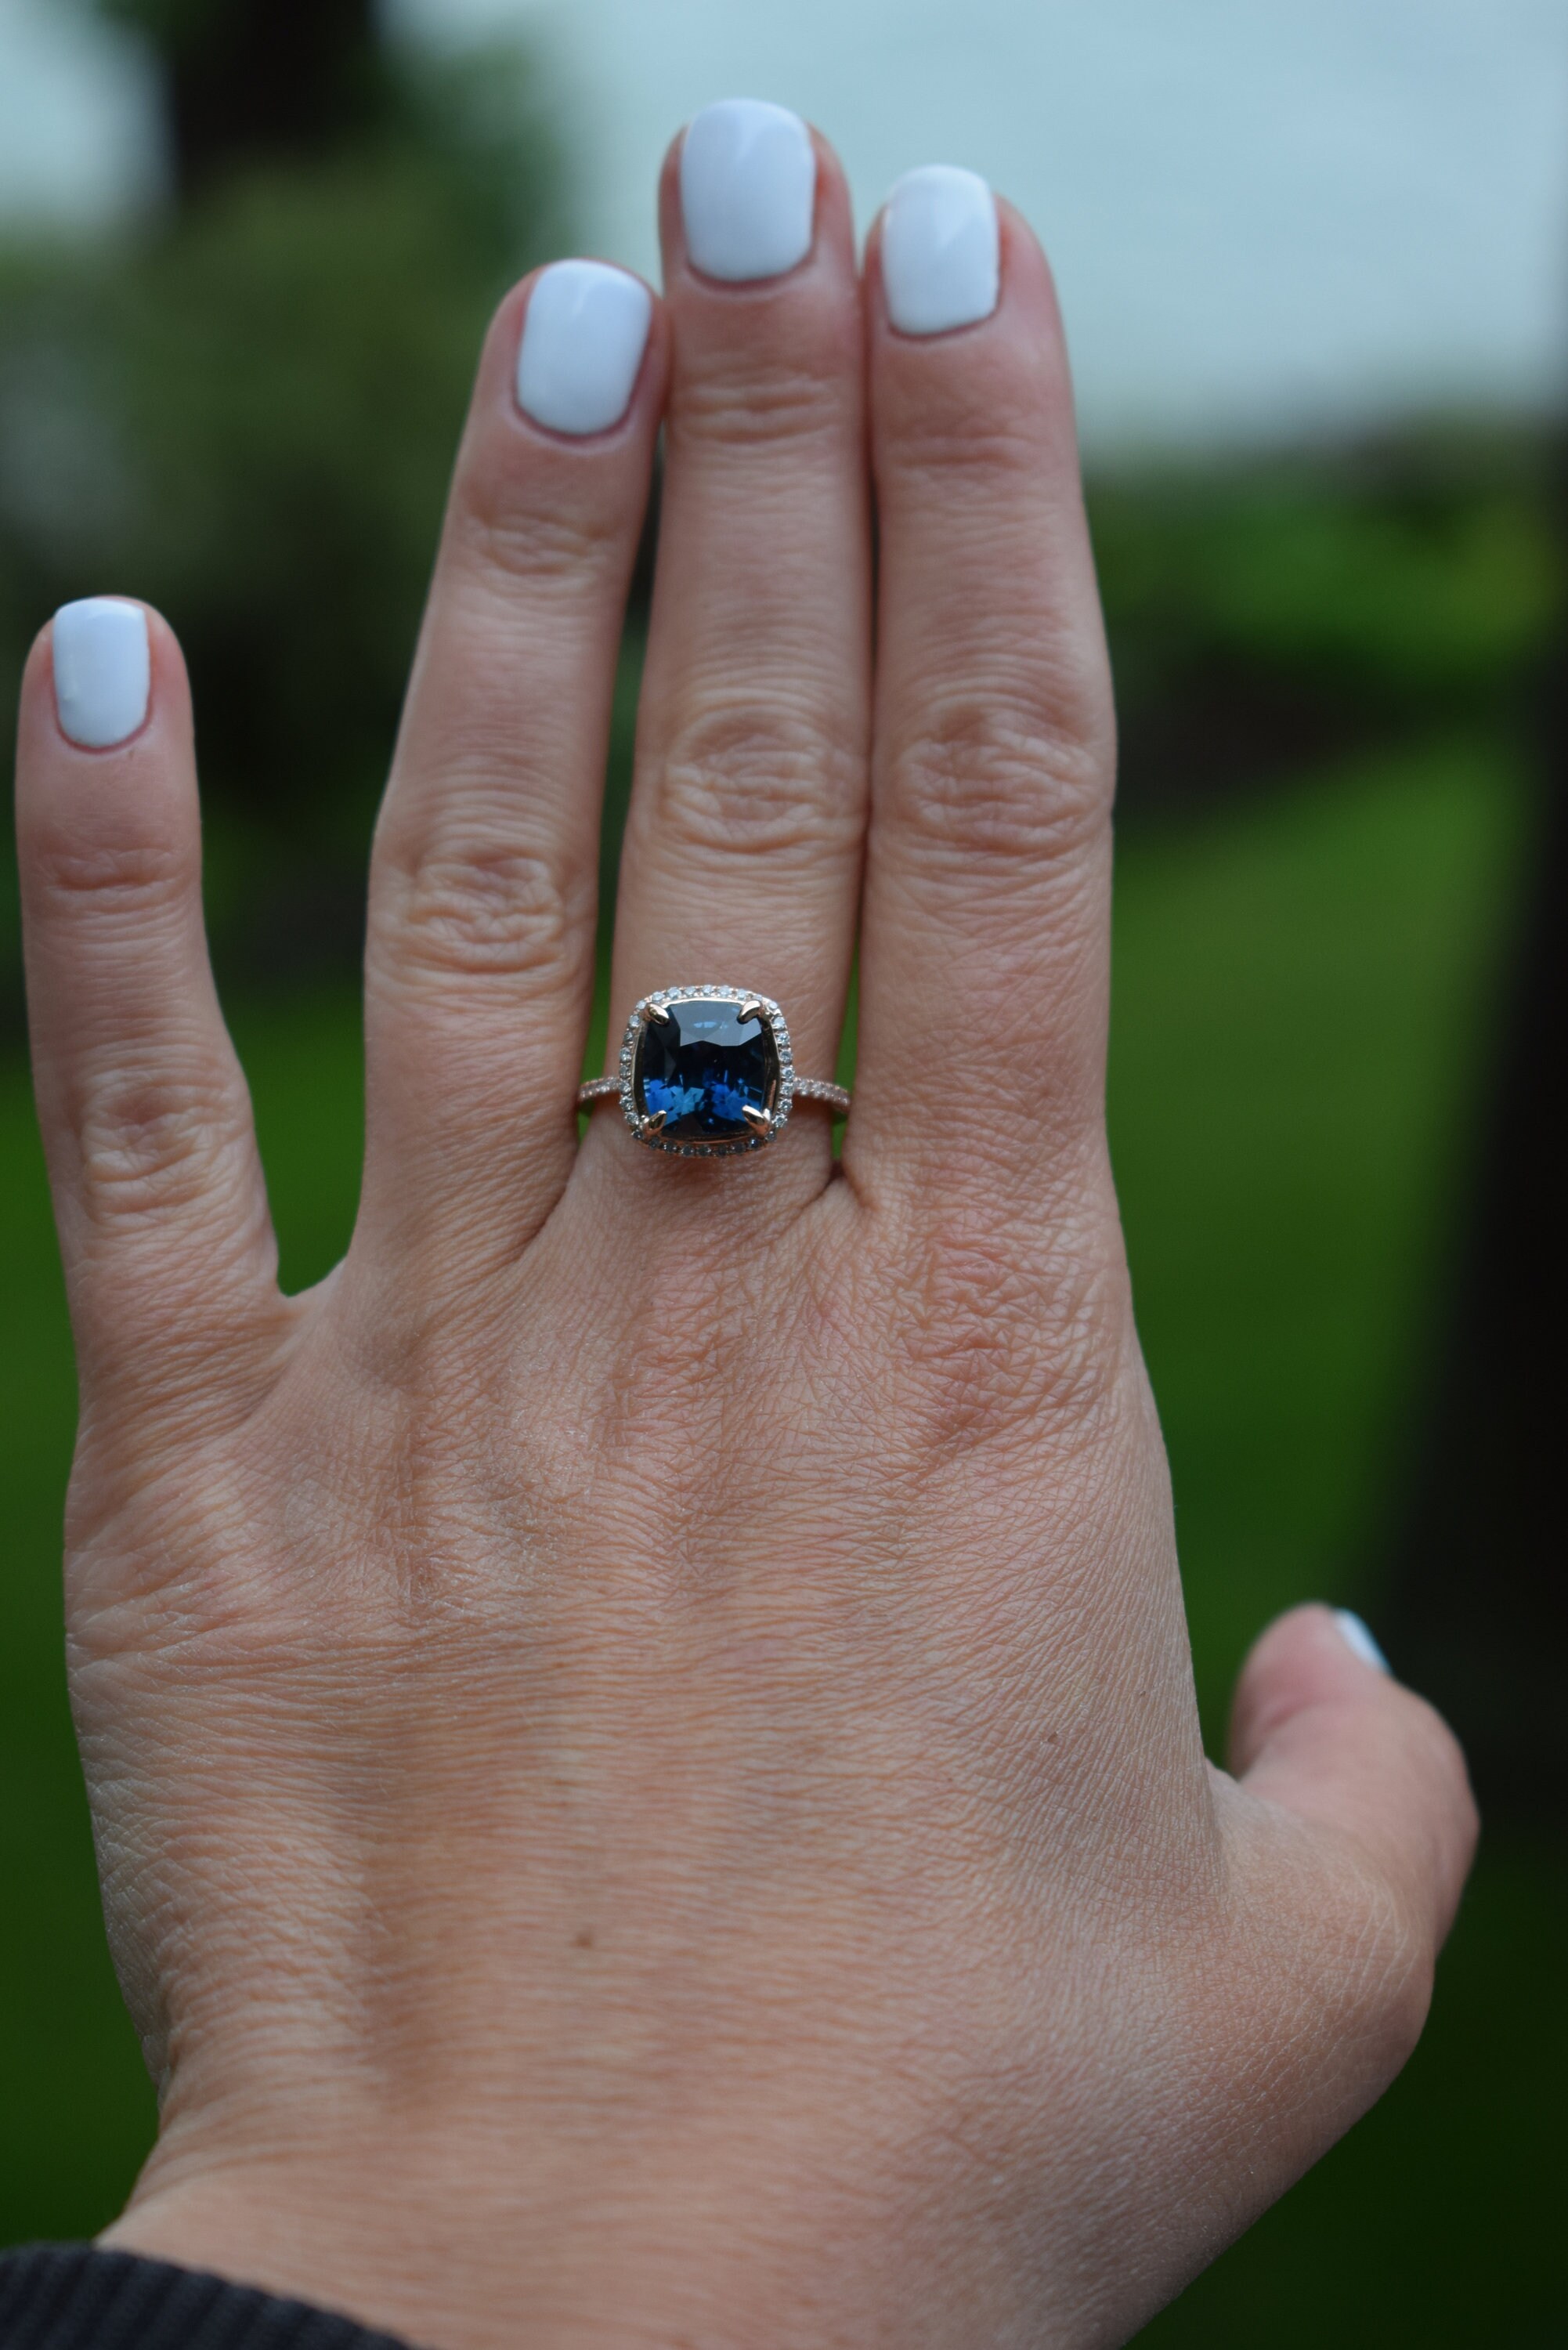 Peacock sapphire engagement ring. 4.11ct square cushion cut blue green ...